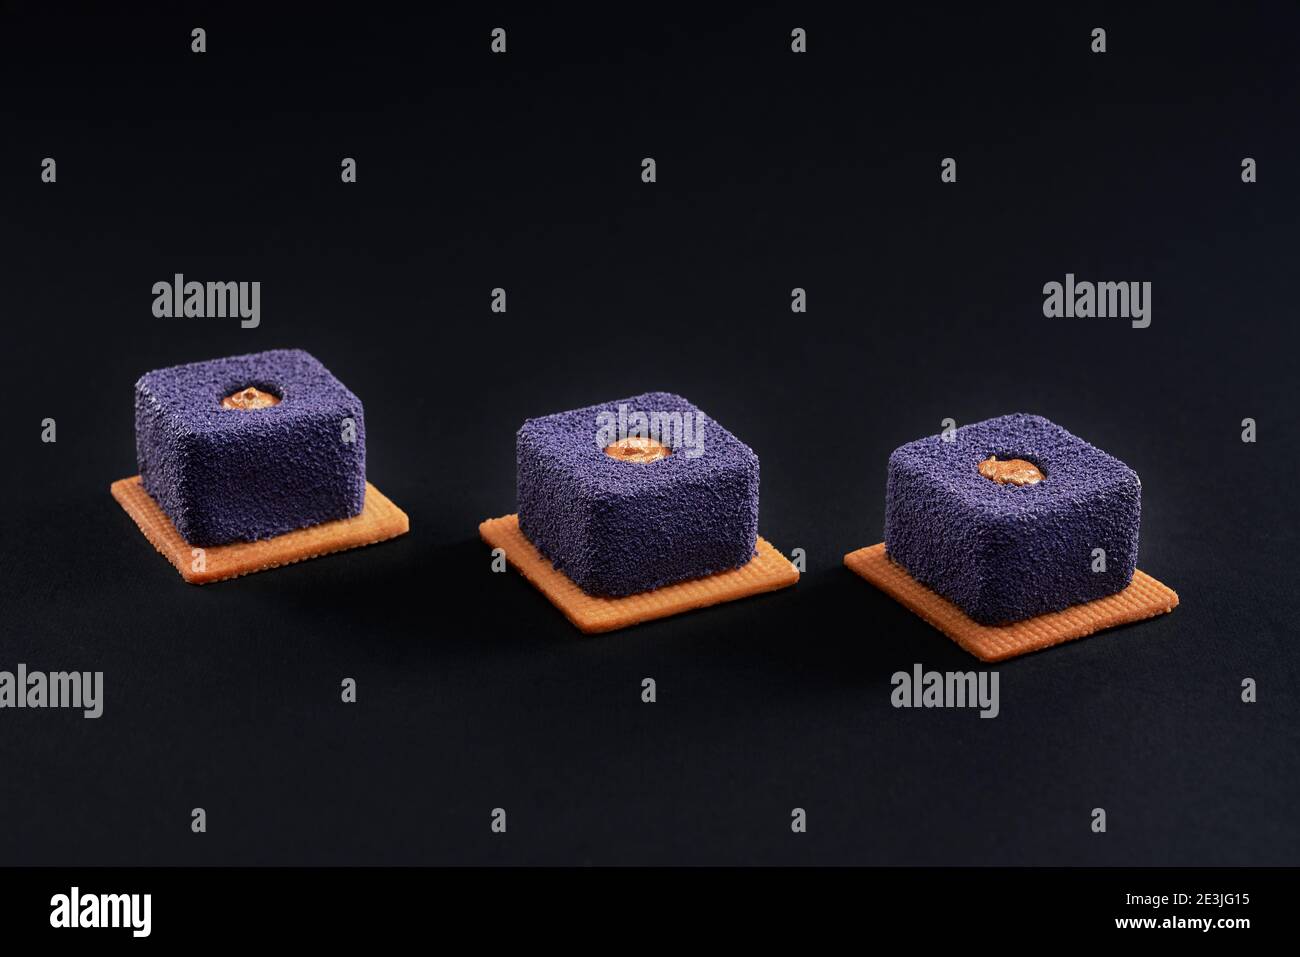 Closeup view of matte purple dessert filled with brown creme isolated on black studio background. Three small square matte cakes in row on cookies in Stock Photo